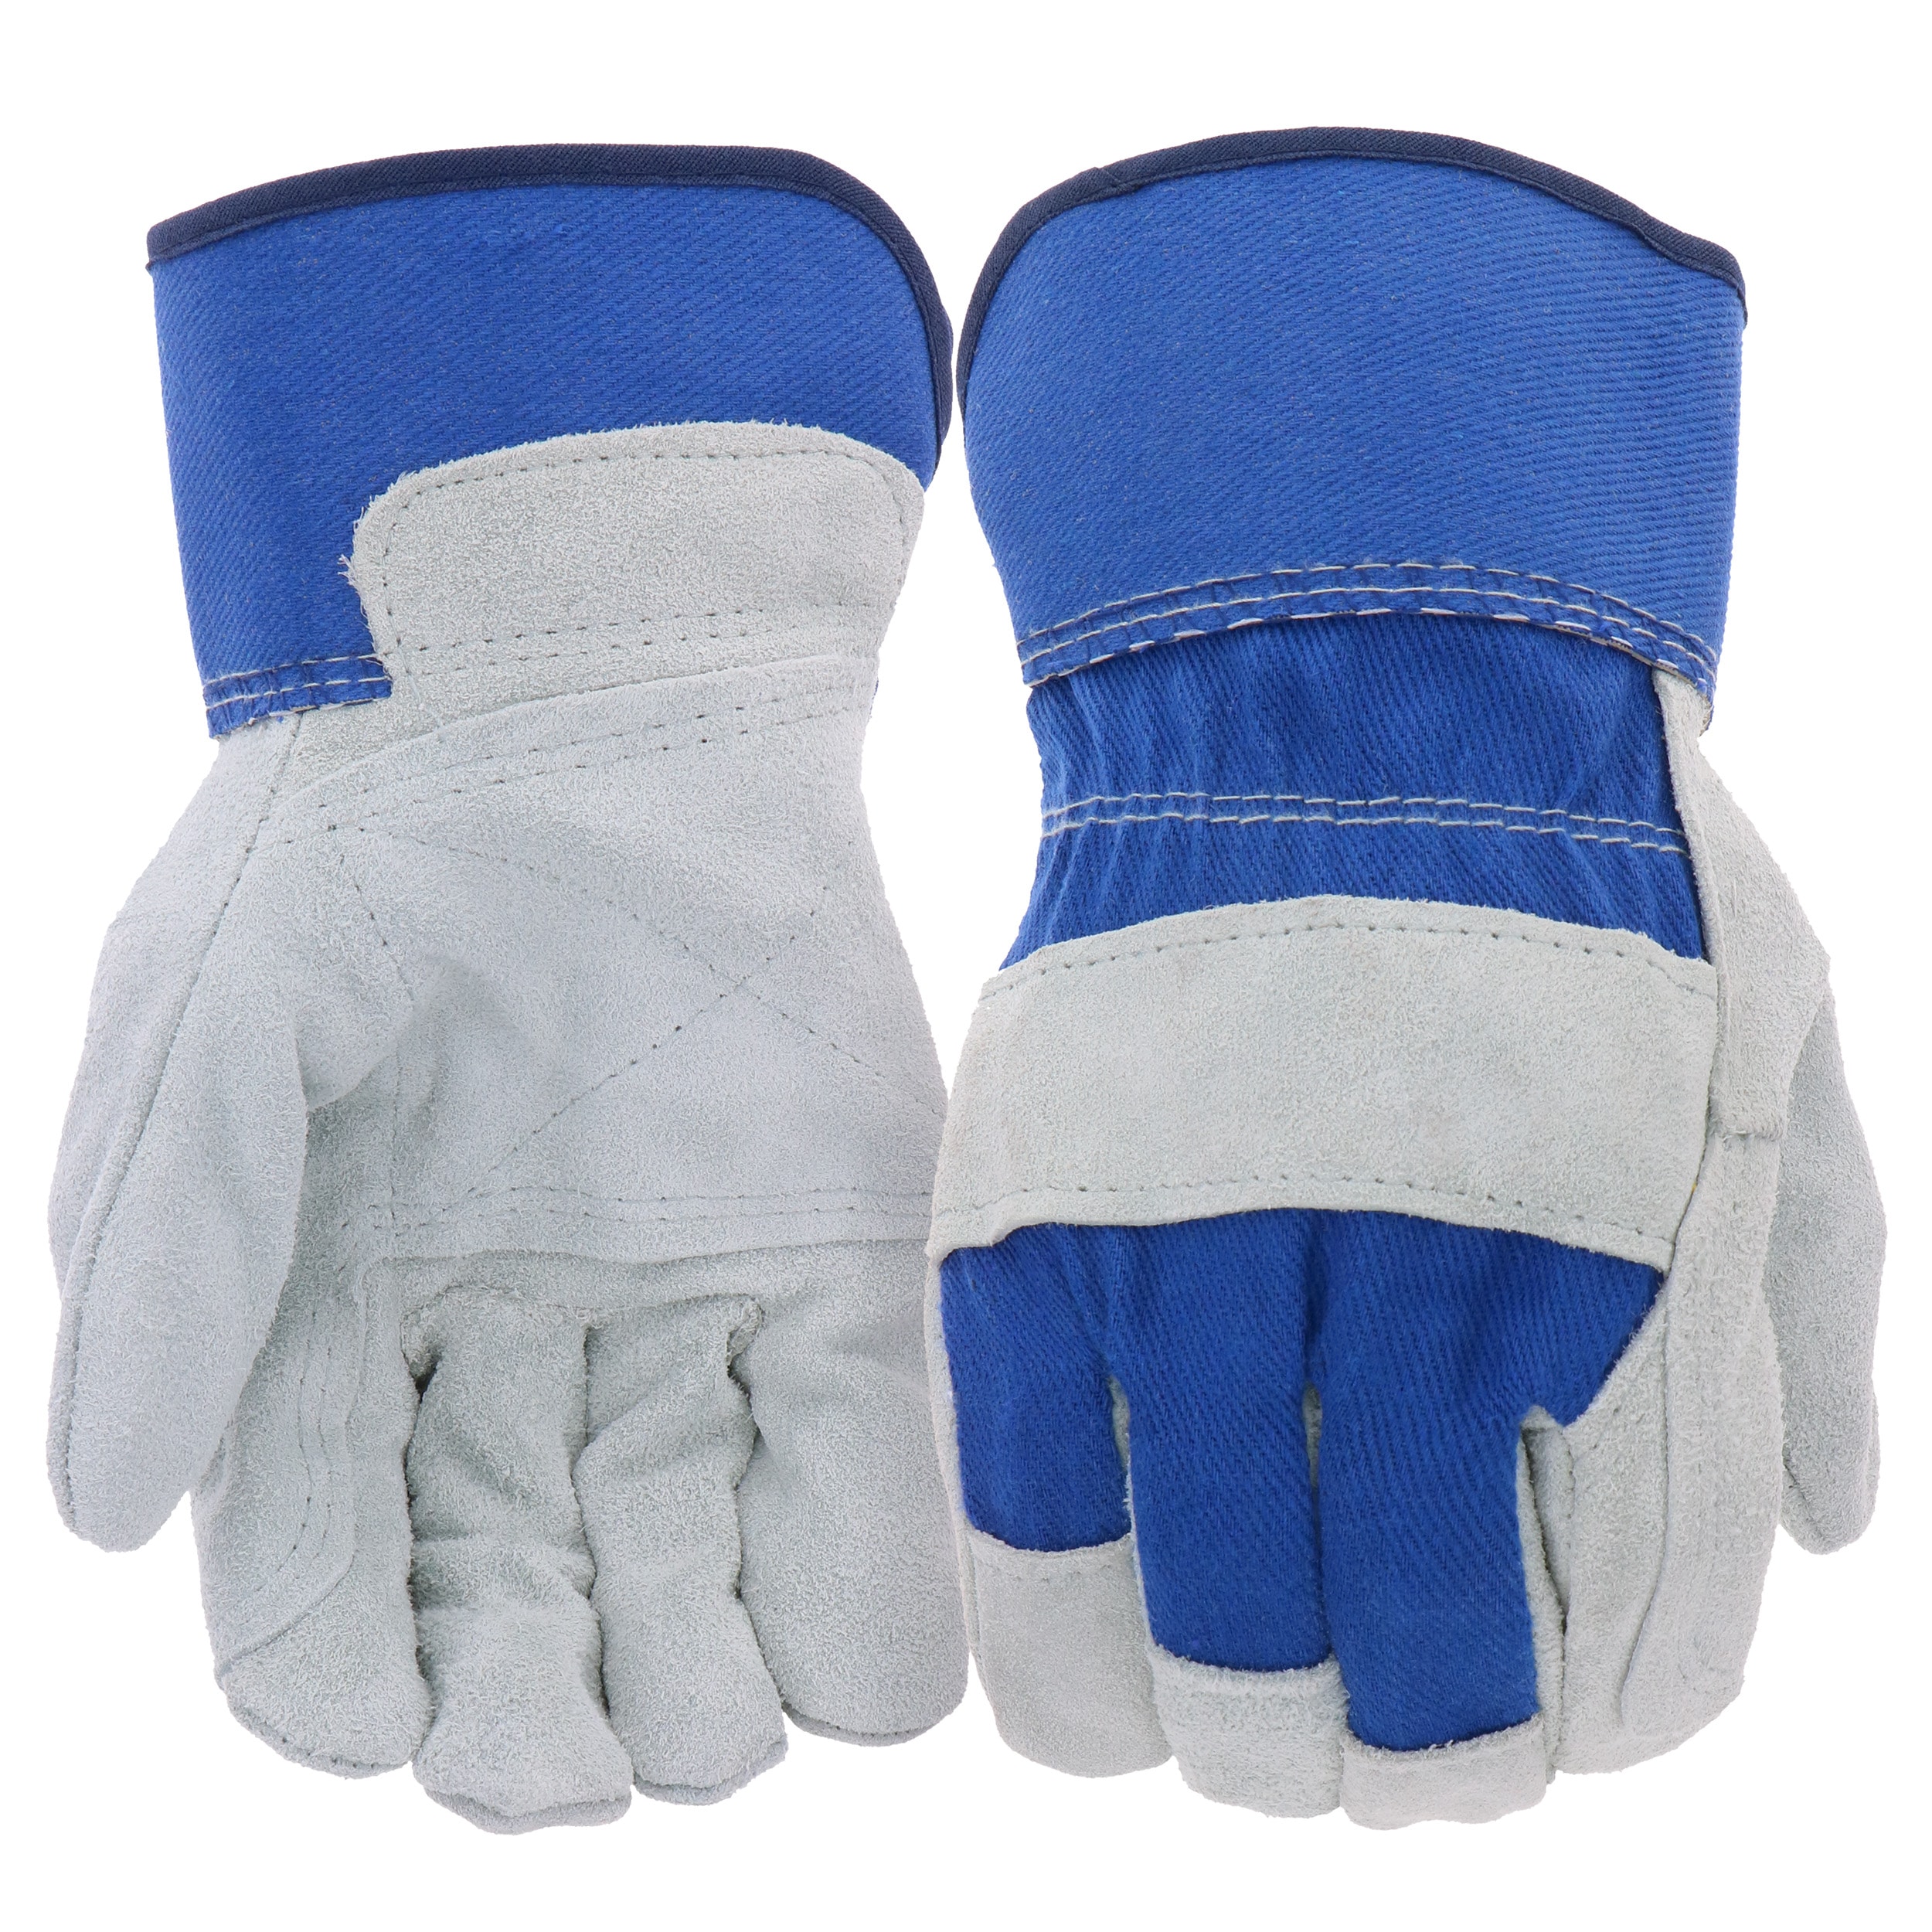 Rugged Blue Leather Palm General Purpose Work Gloves